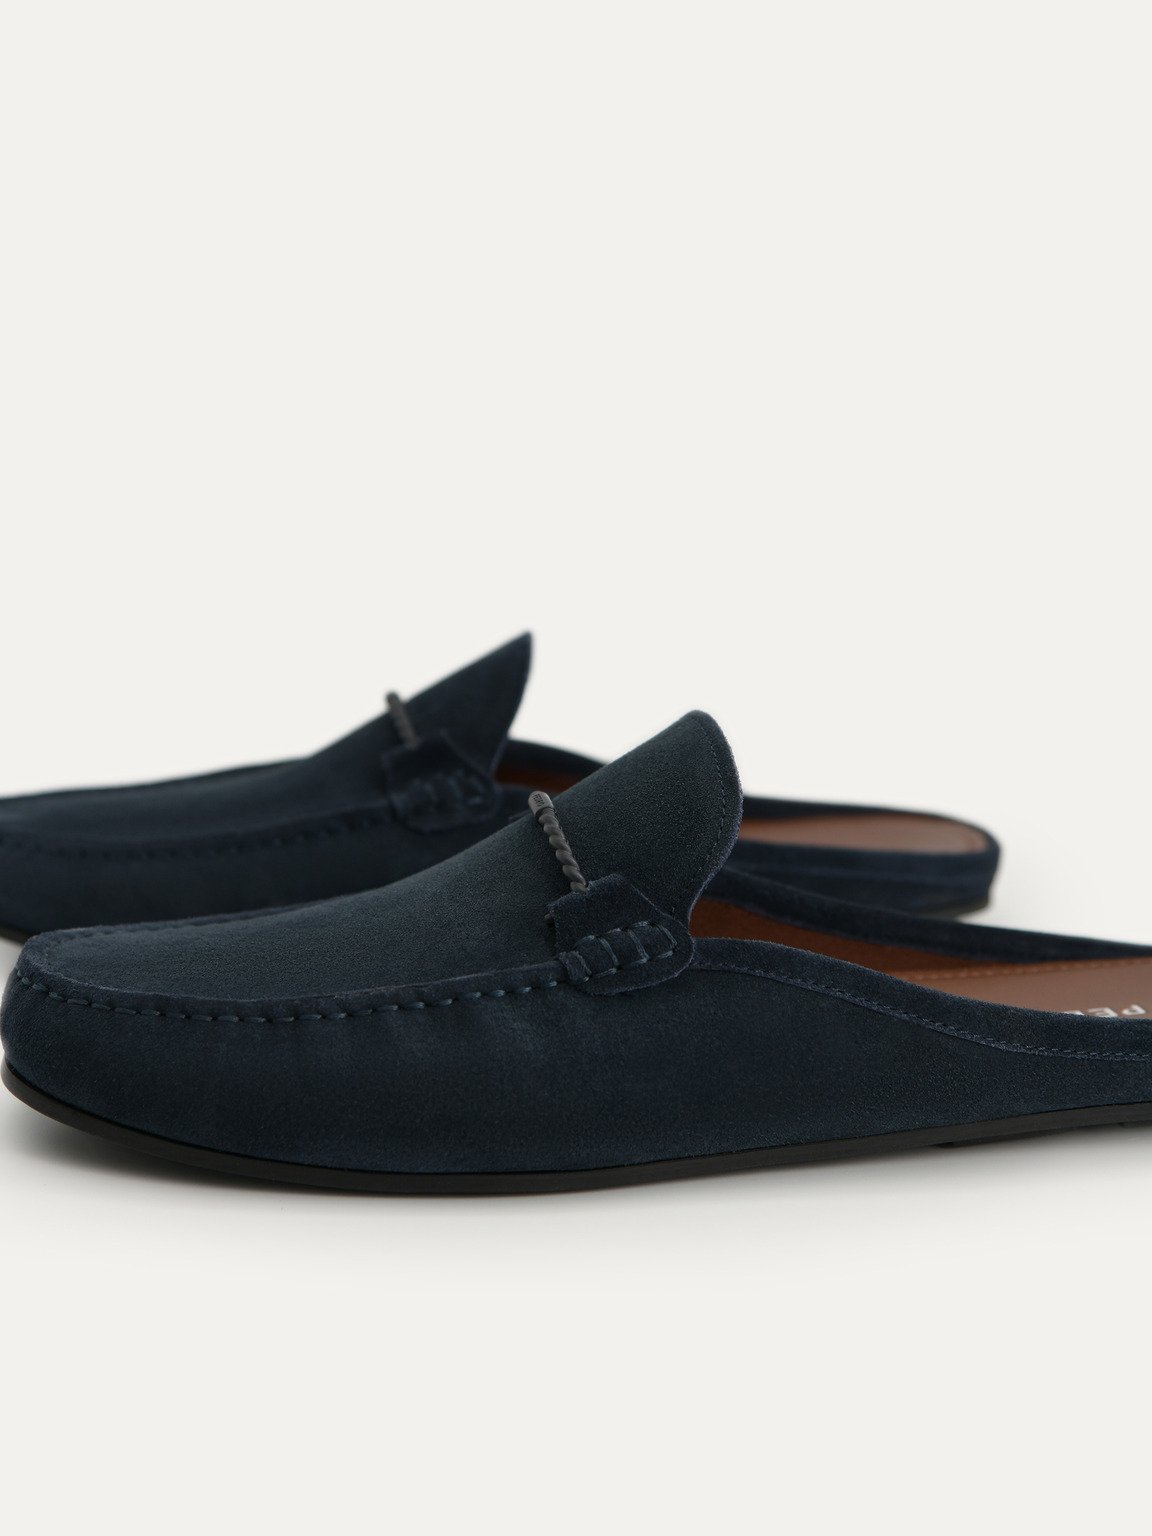 Leather Slip-On Driving Shoe, Navy